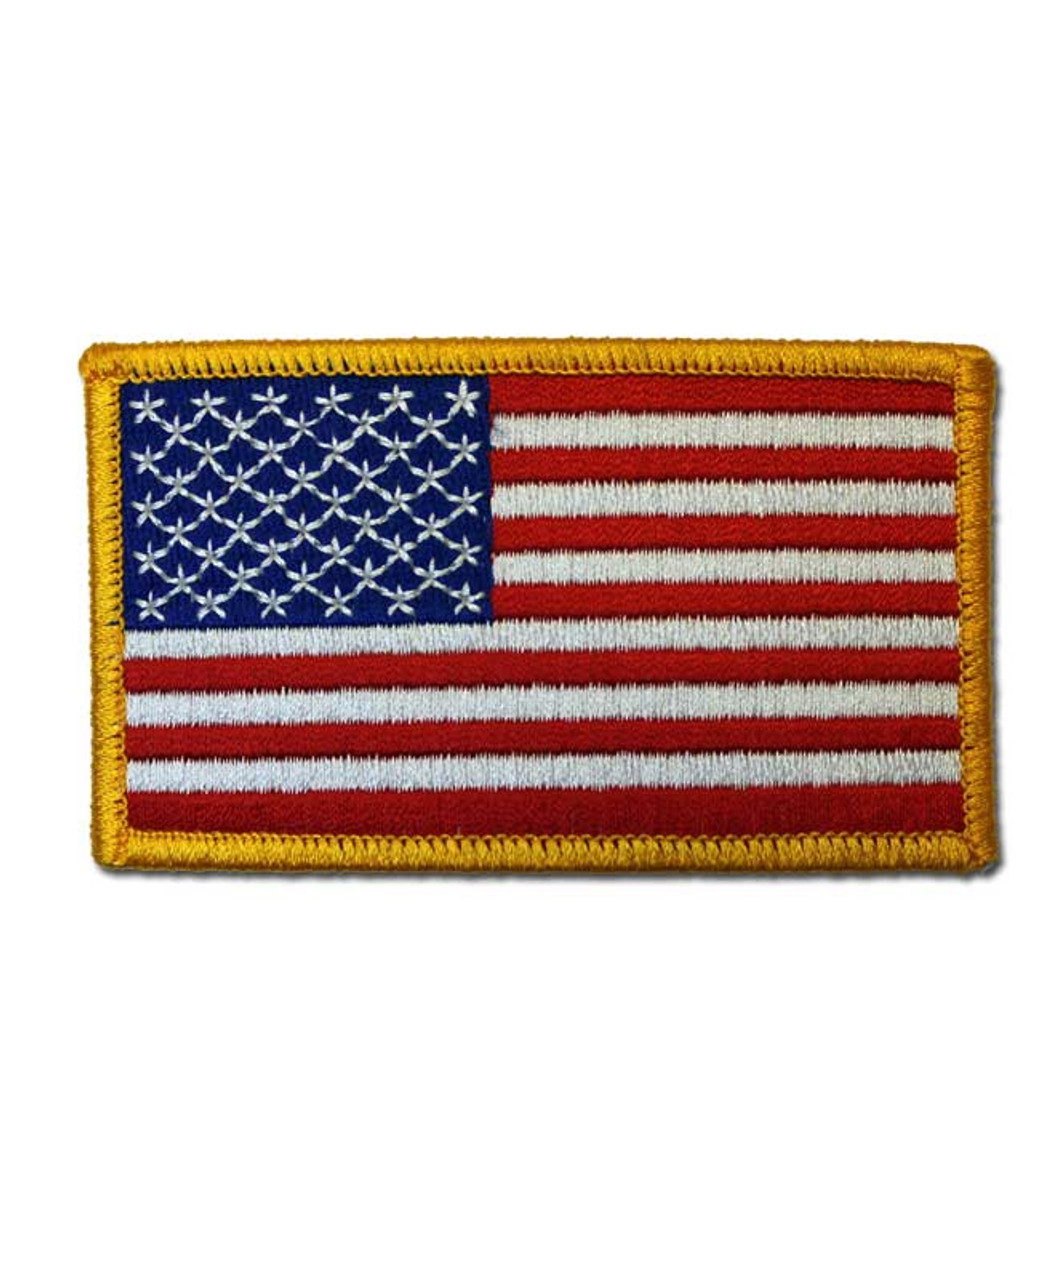 American Flag Patch - The National WWII Museum